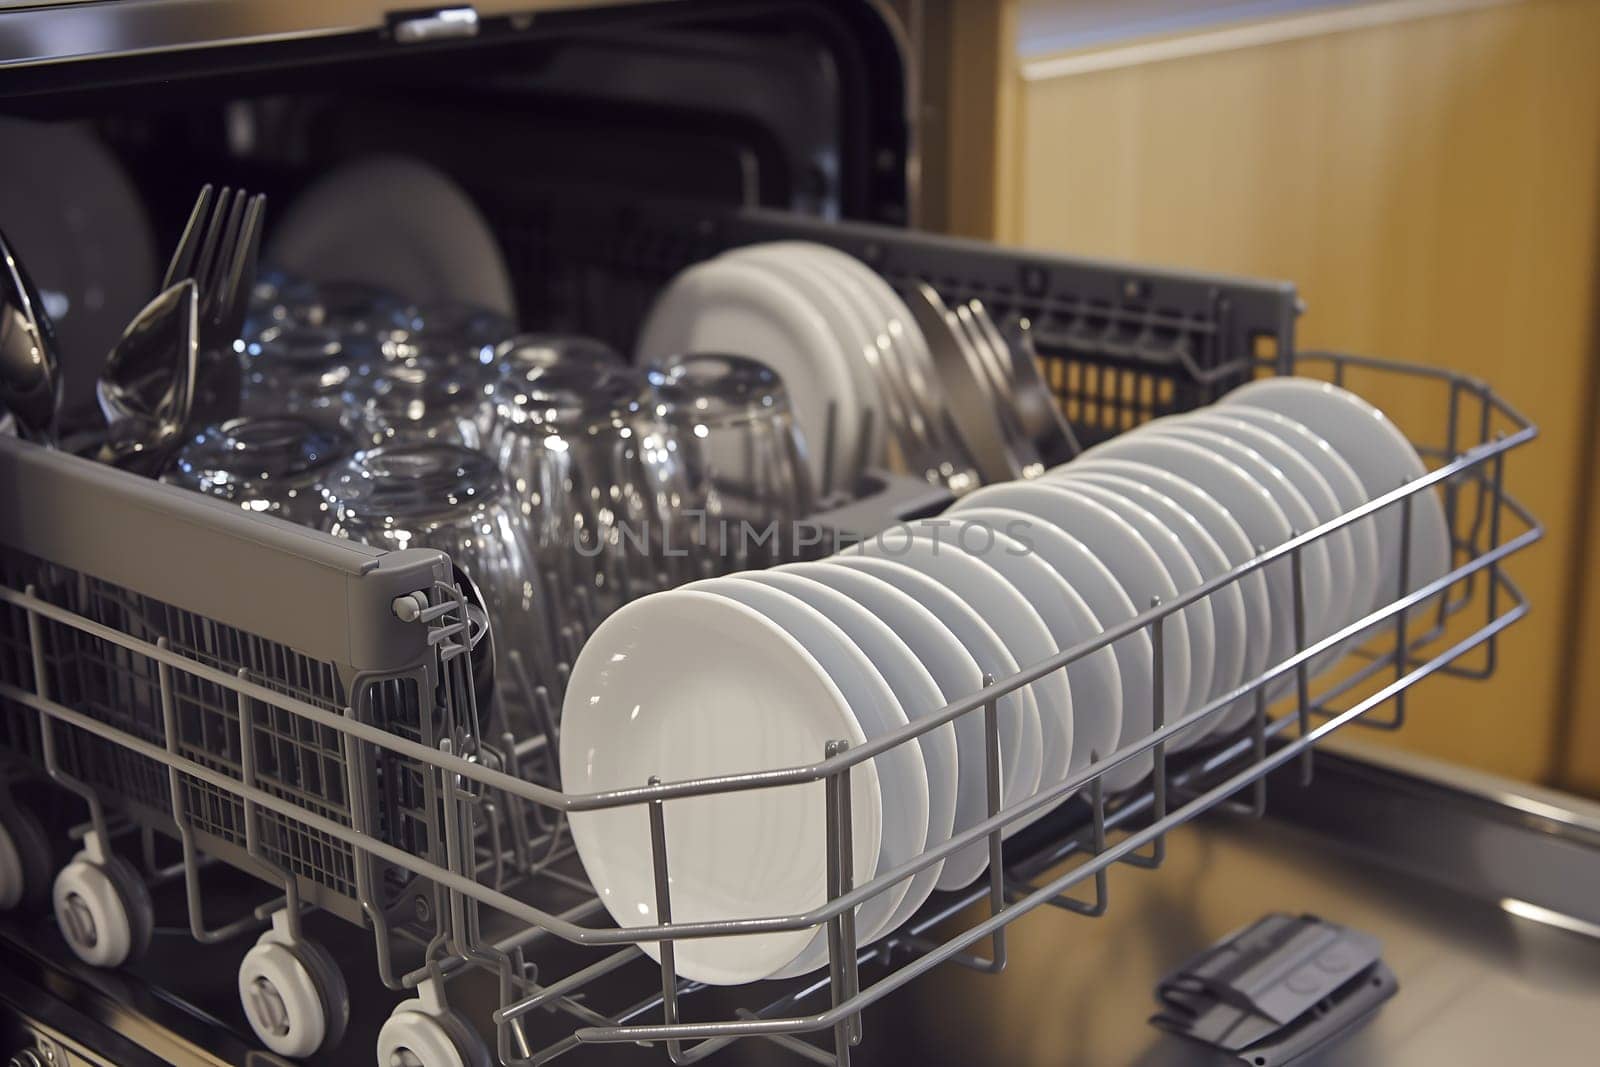 A dishwasher with many plates and silverware in it. Neural network generated image. Not based on any actual scene or pattern.